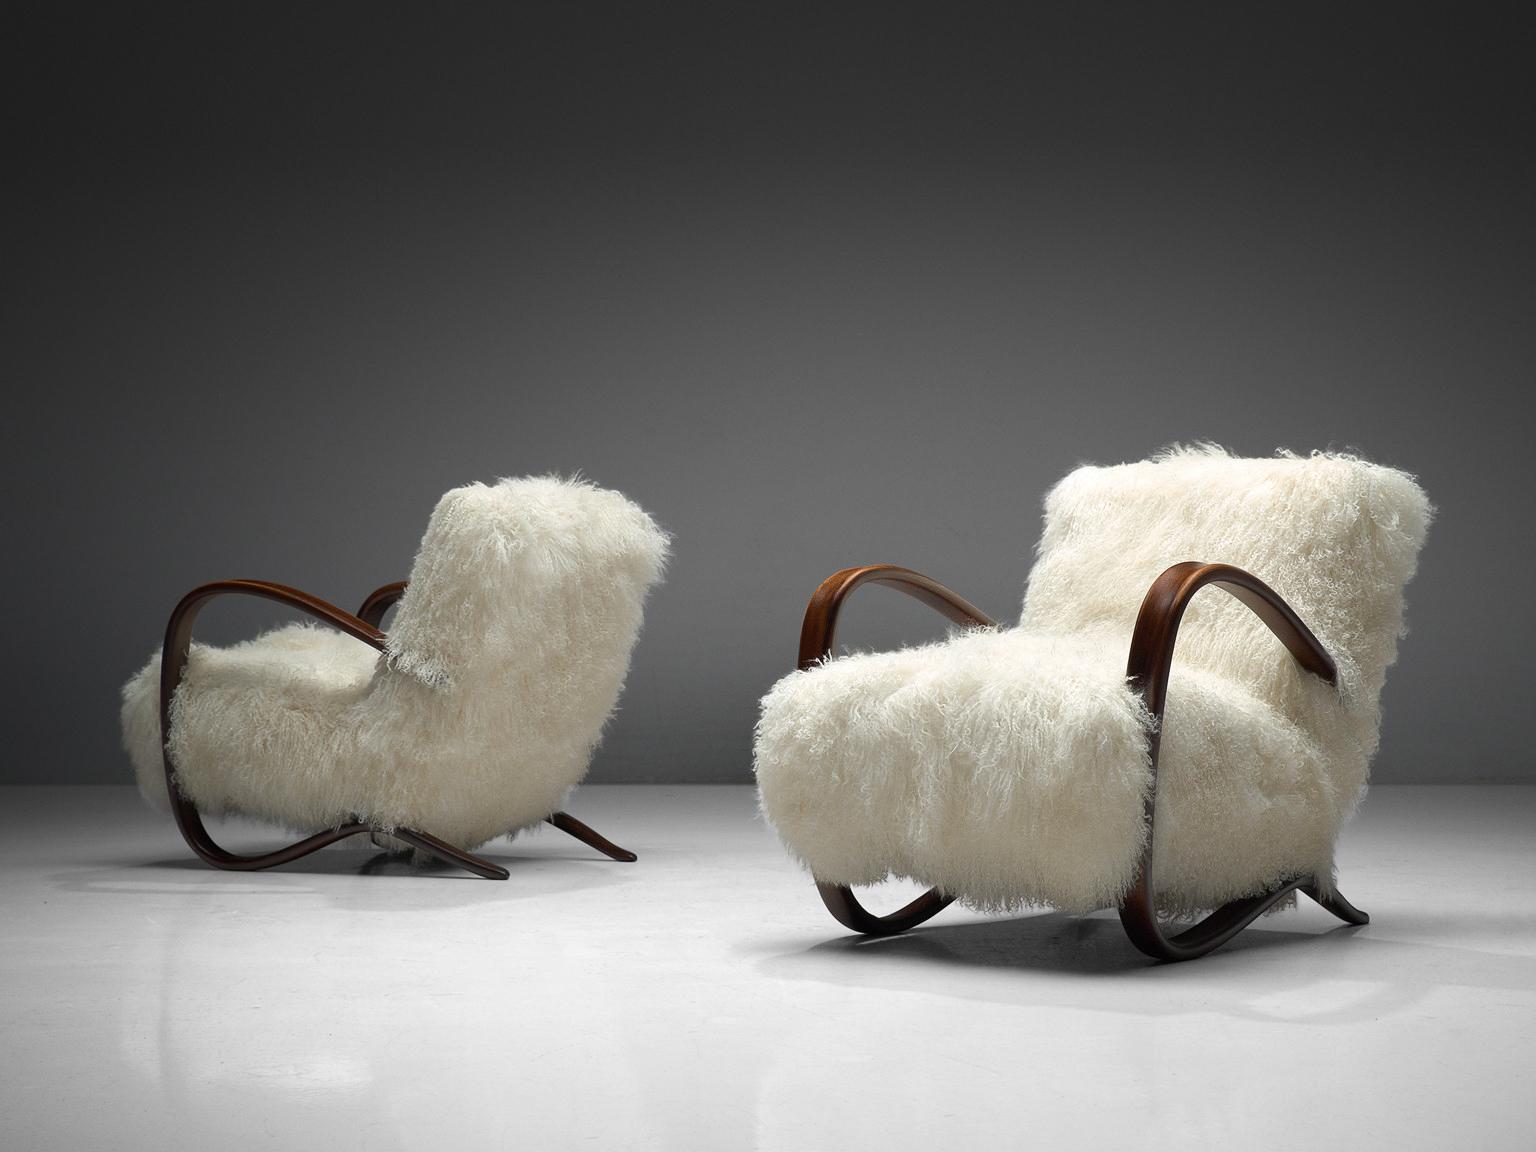 Jindrich Halabala, lounge chairs, model 'H269', stained beech, Tibetan lambswool, Czech Republic, 1930s.

Extraordinary easy chairs in white Tibetan lambswool upholstery. This design has a very dynamic and abundant appearance and the fuzzy